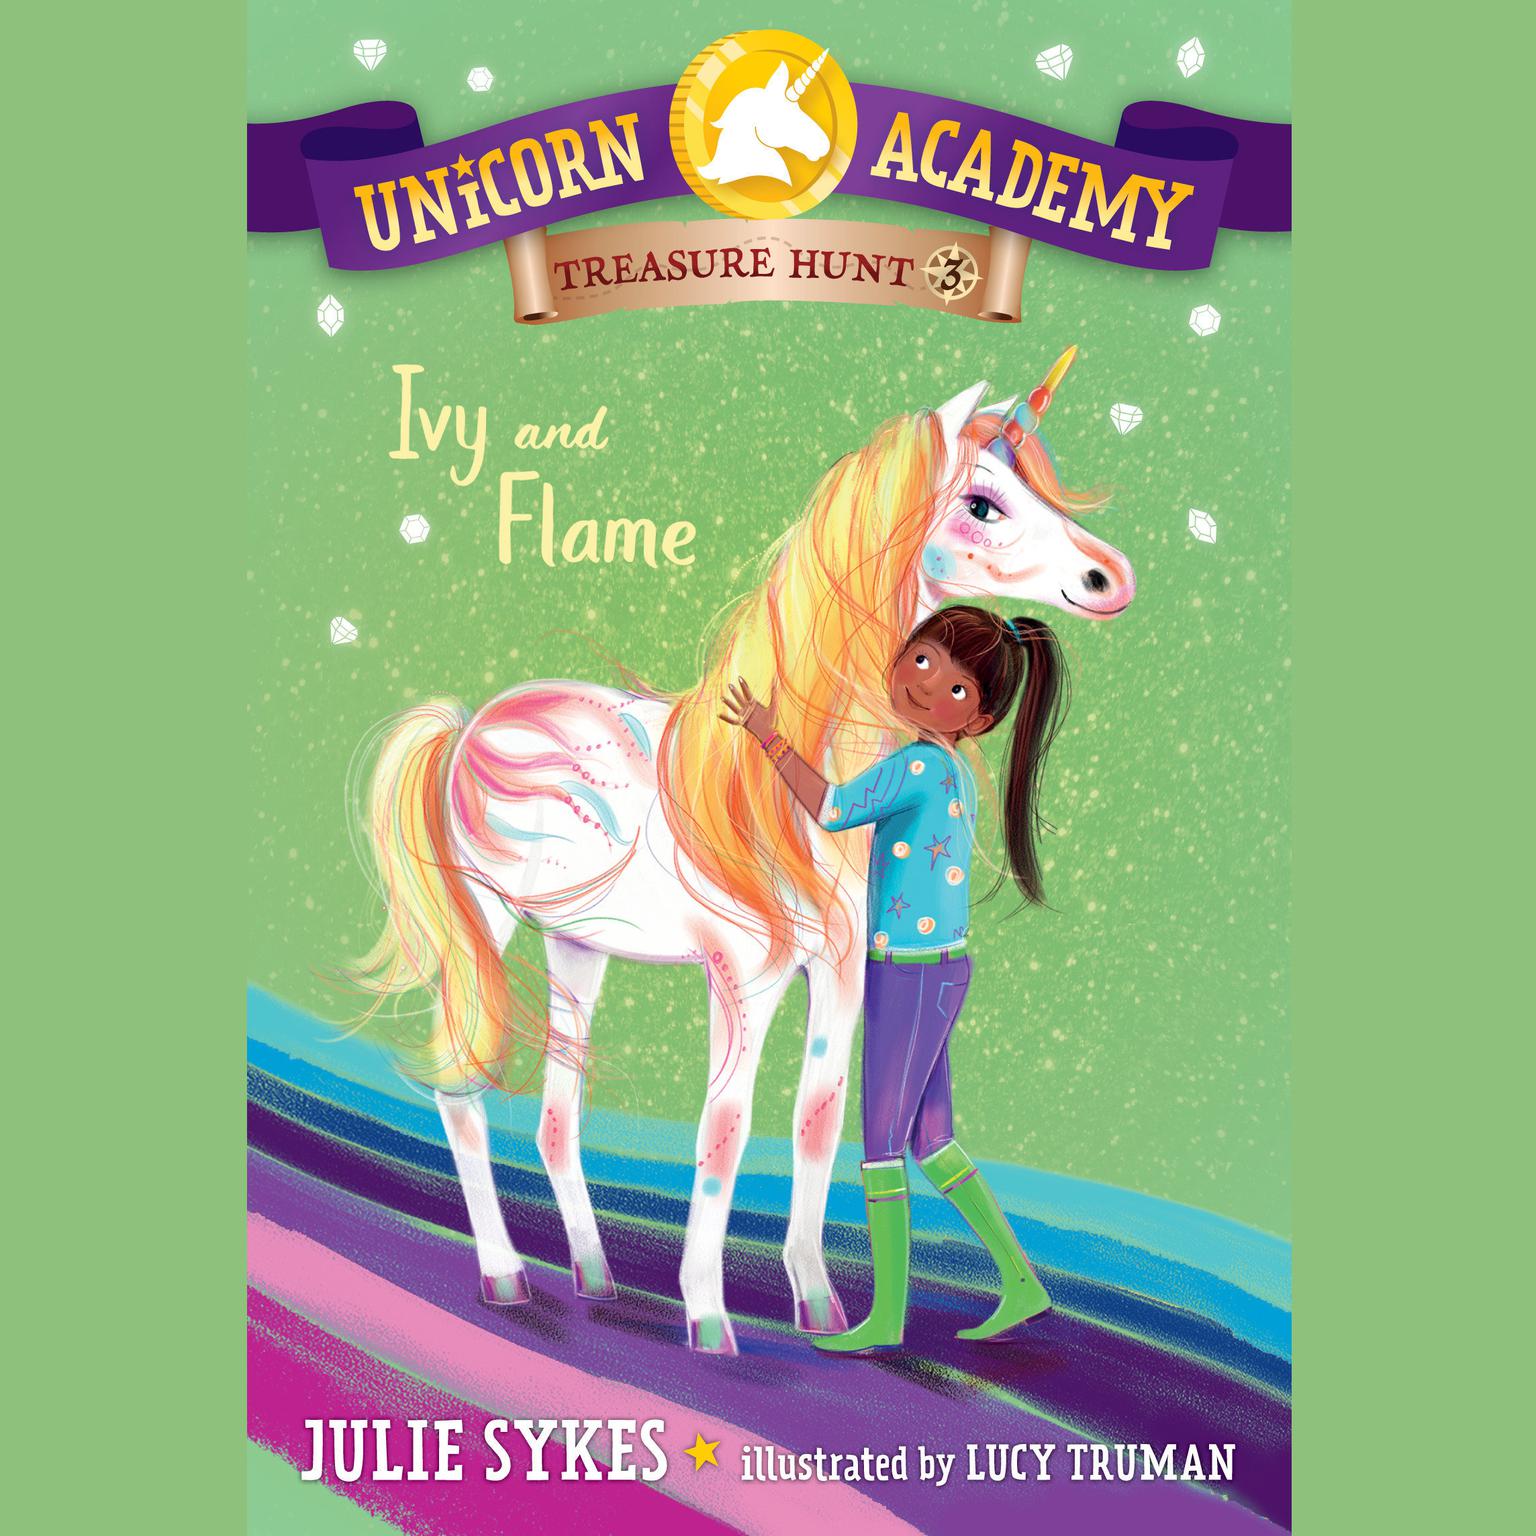 Unicorn Academy Treasure Hunt #3: Ivy and Flame Audiobook, by Julie Sykes